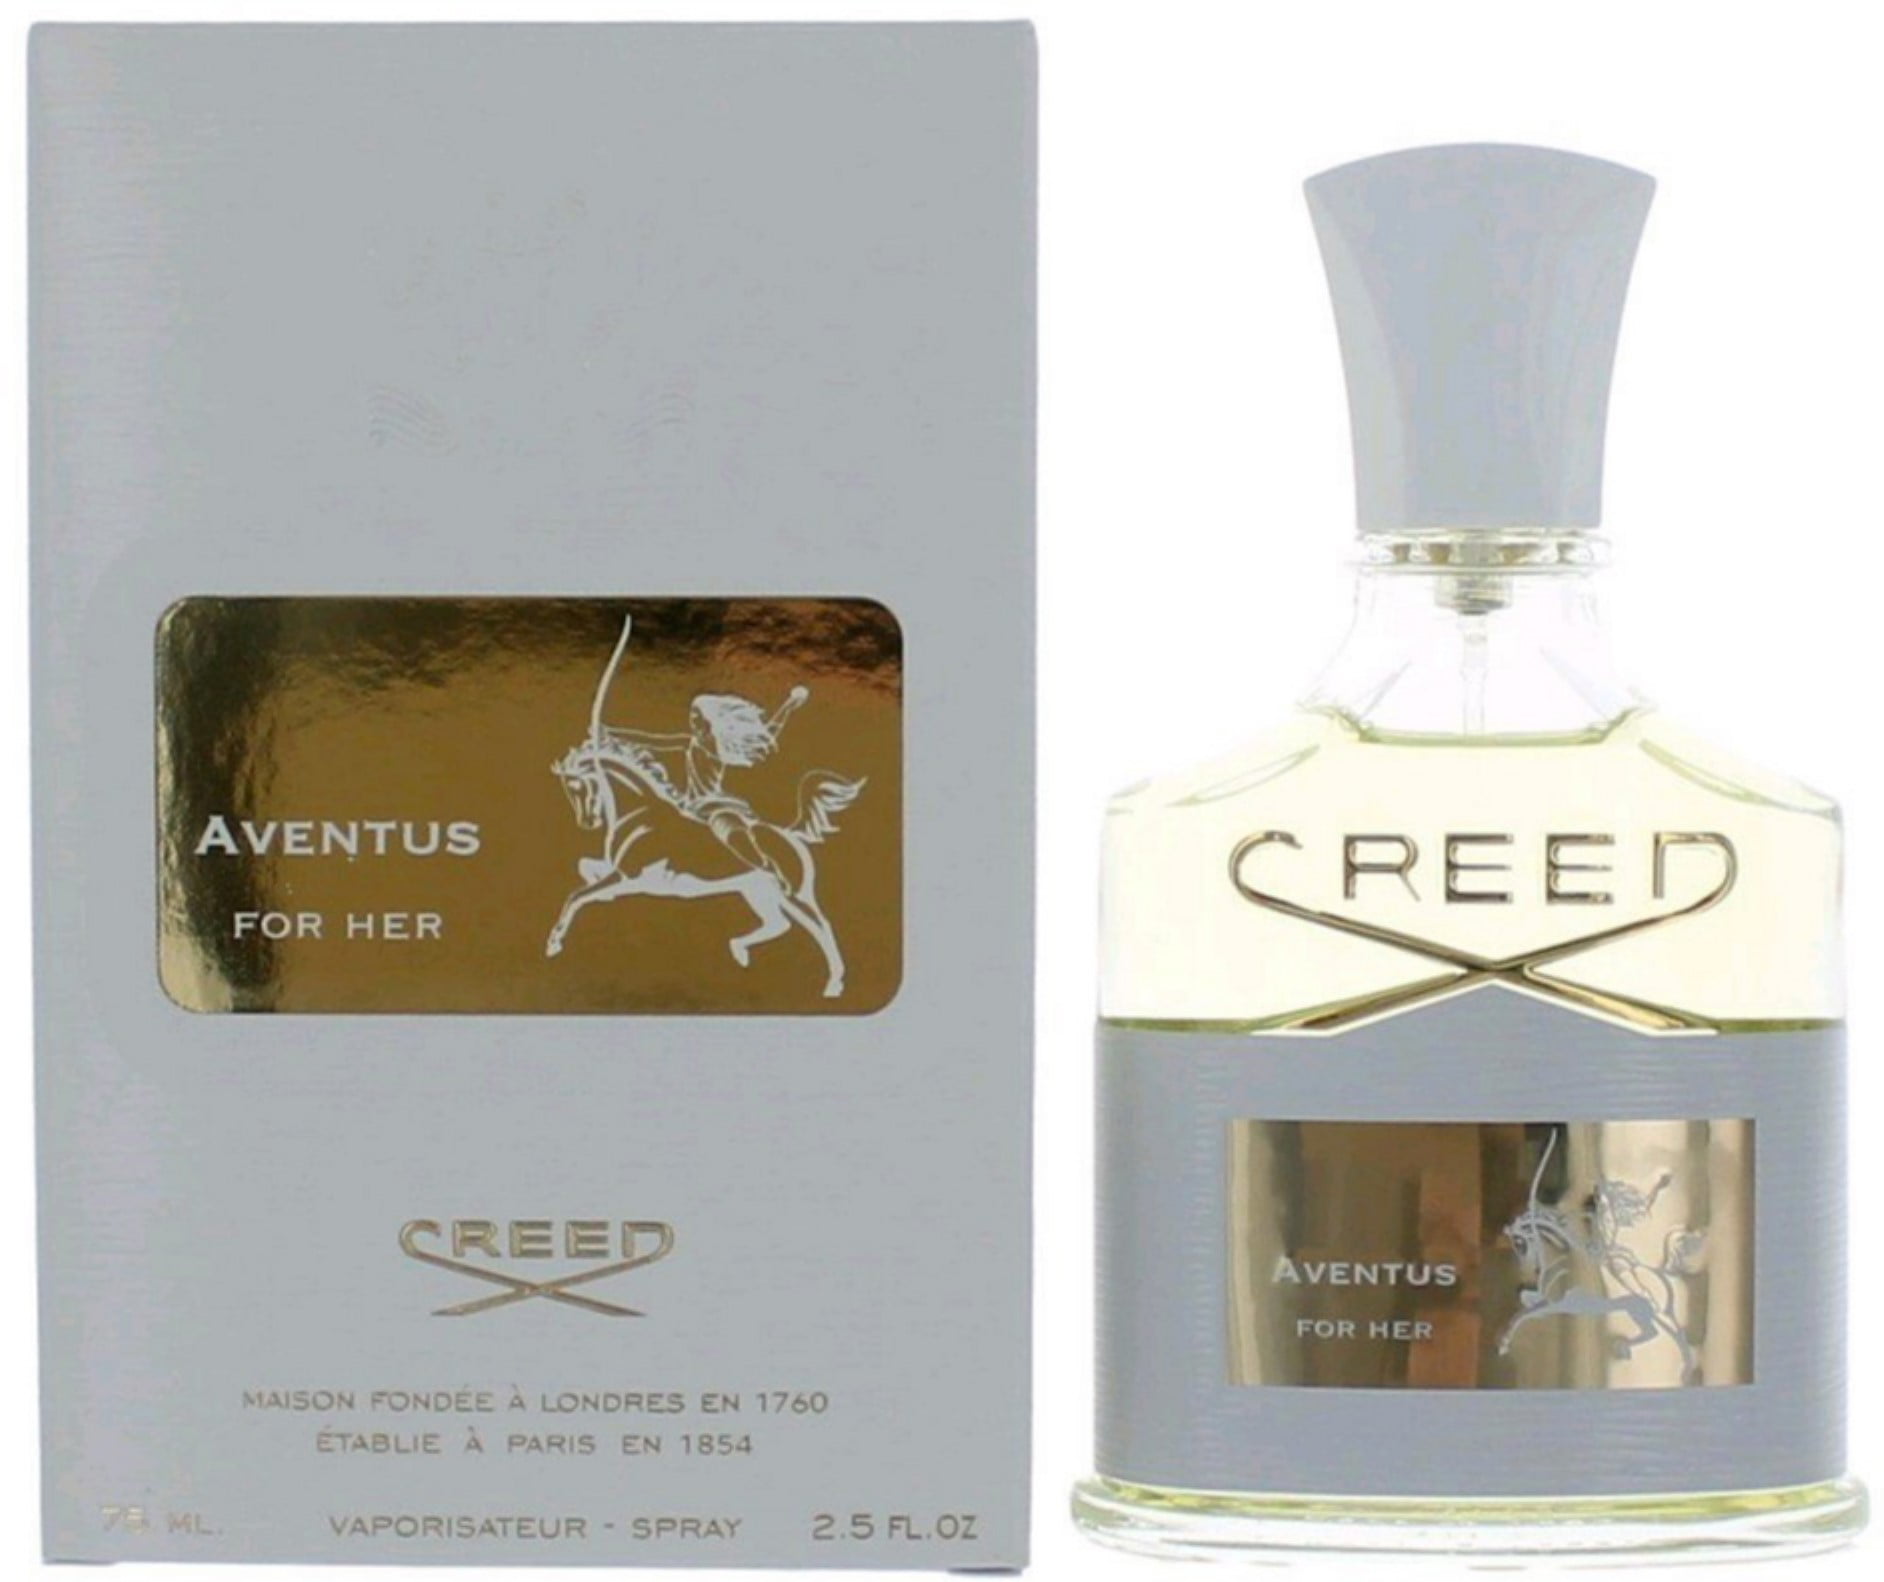 Creed - 3 Pack - Aventus For Her By Creed Eau de Parfum Spray 2.5 oz ...